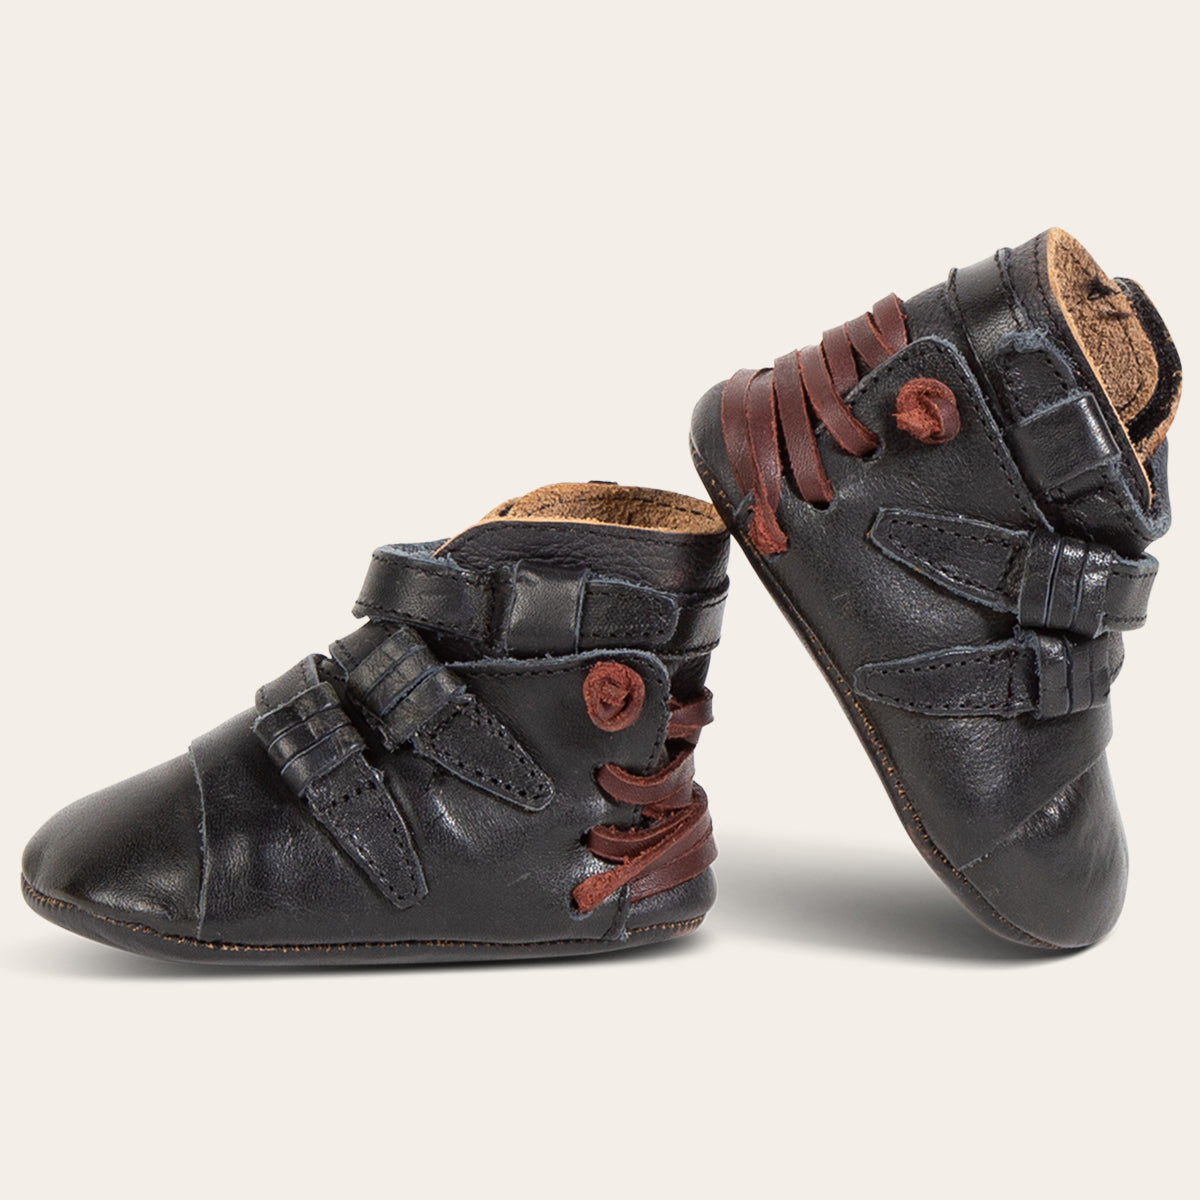 side view showing contrasting back lace and side strap detailing on FREEBIRD infant baby crue black leather bootie